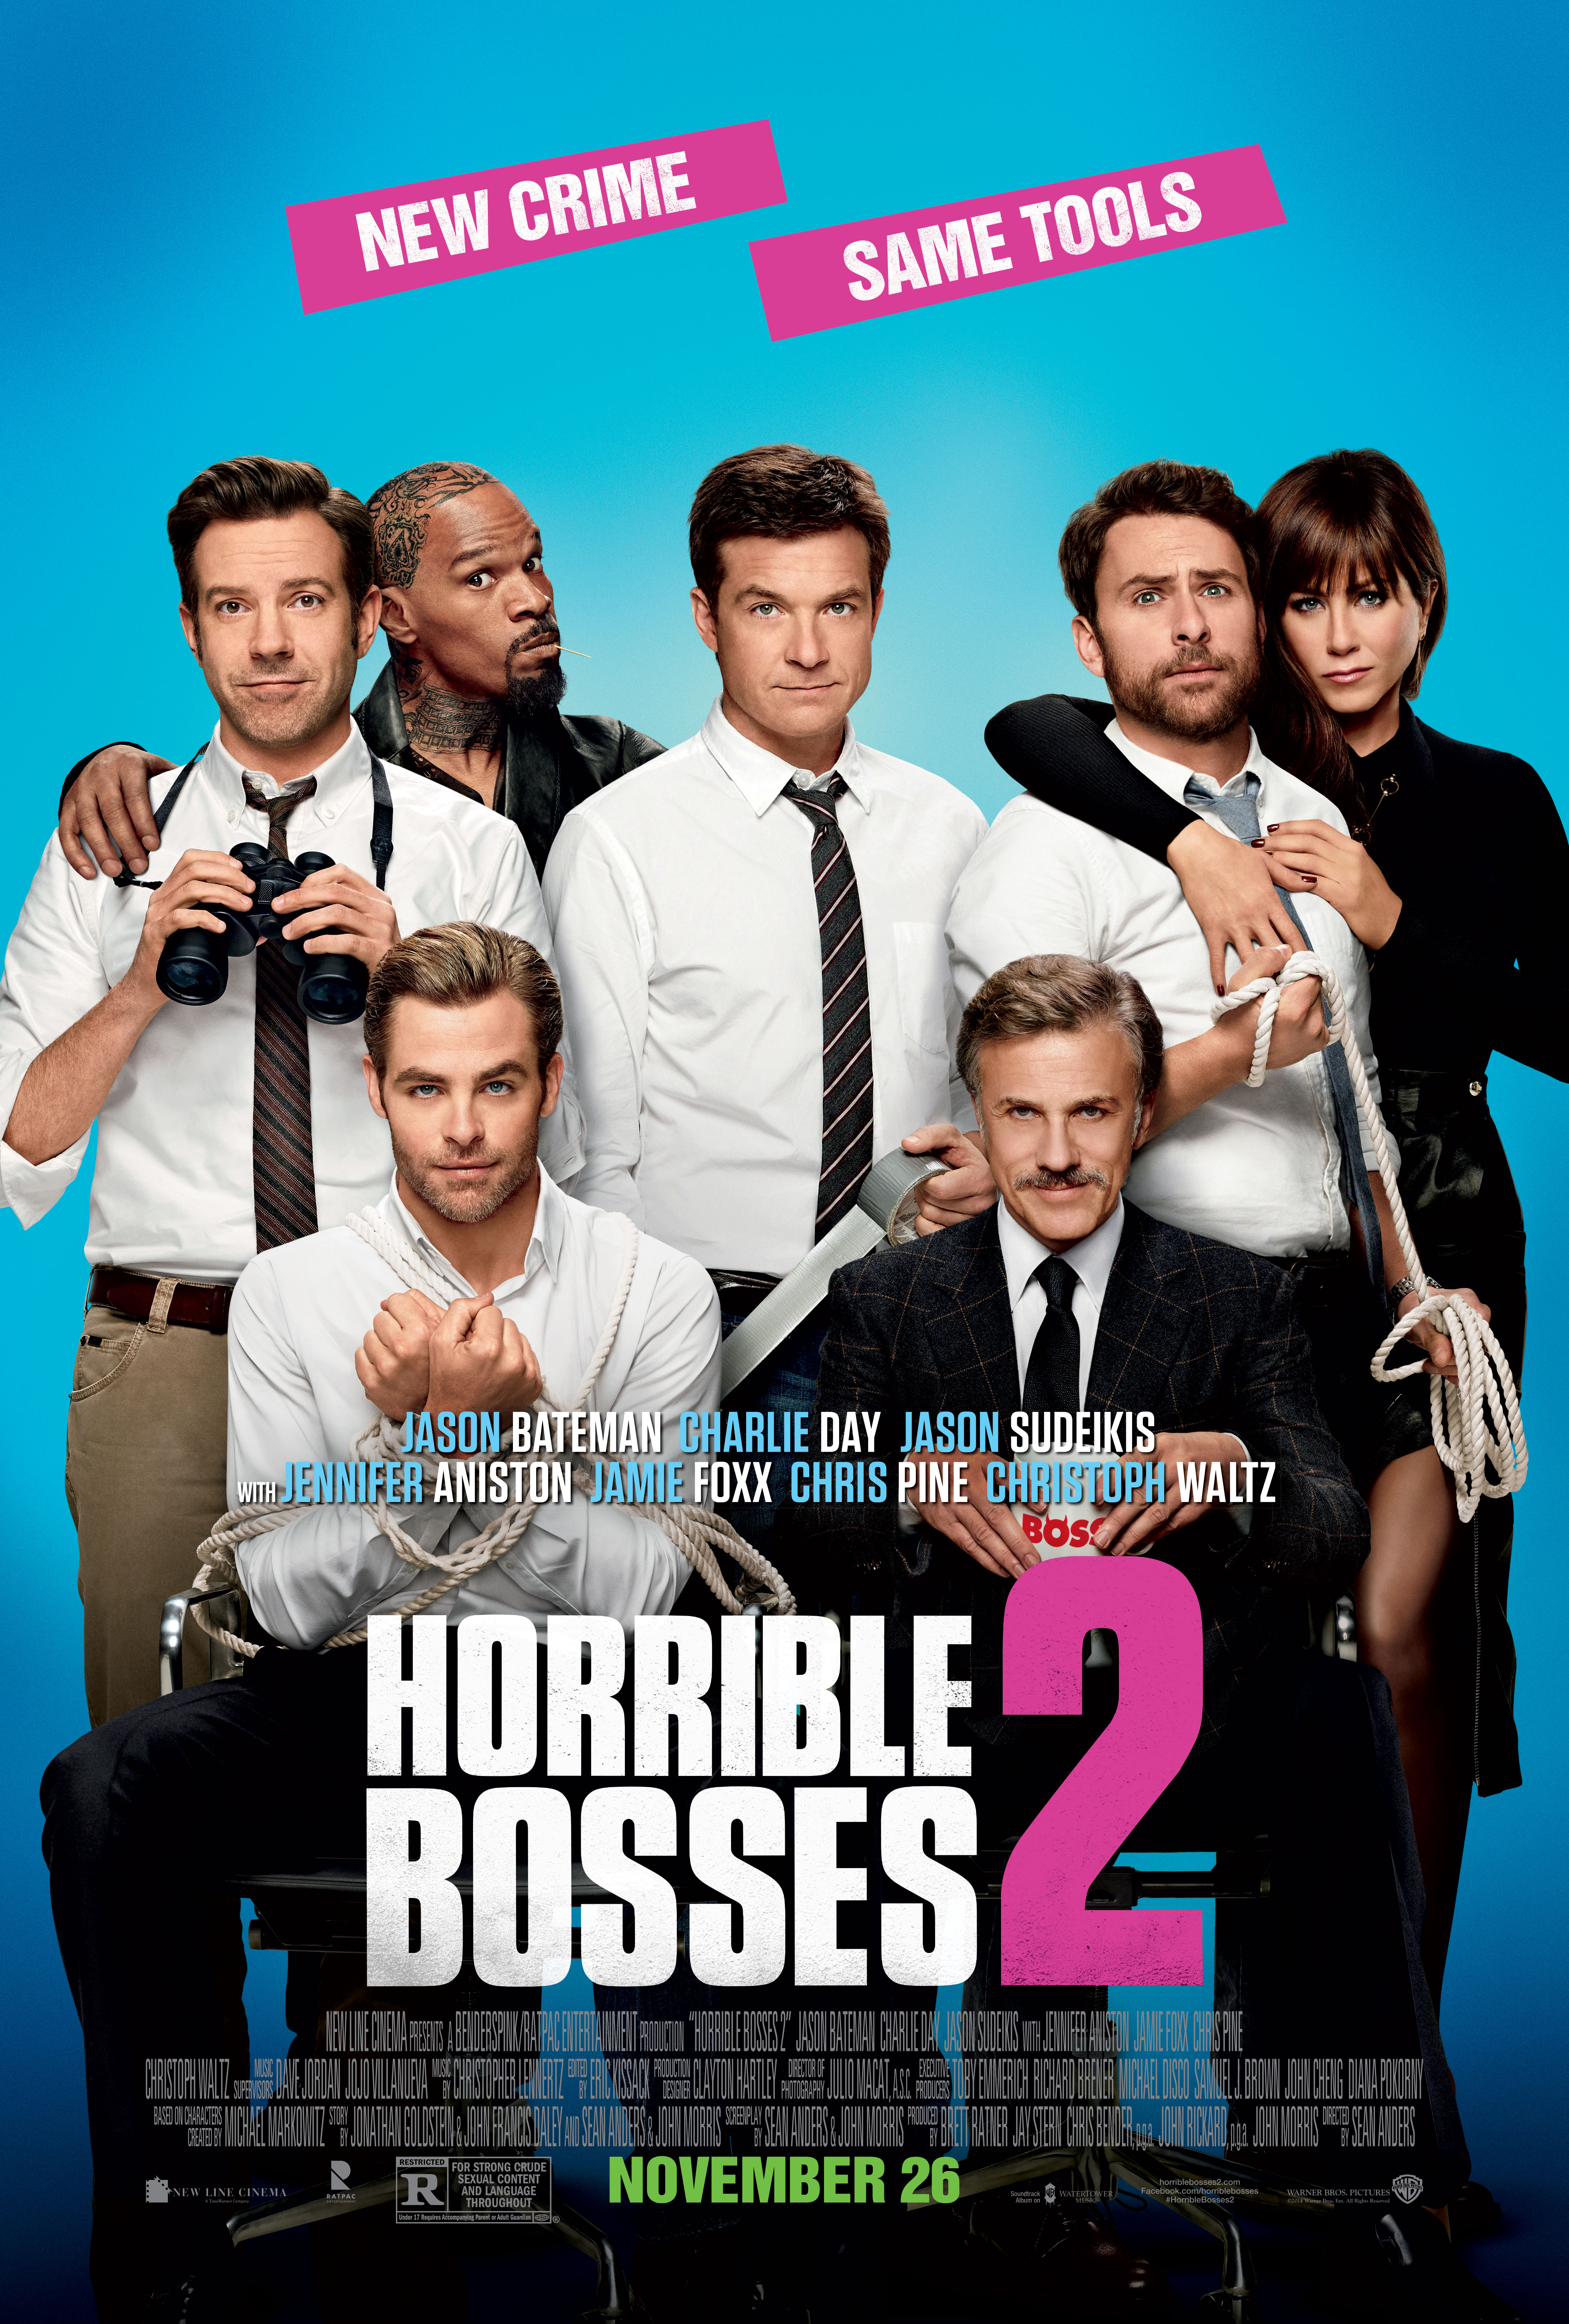 Horrible Bosses 2' trailer is full of antics and, of course, 'Turn